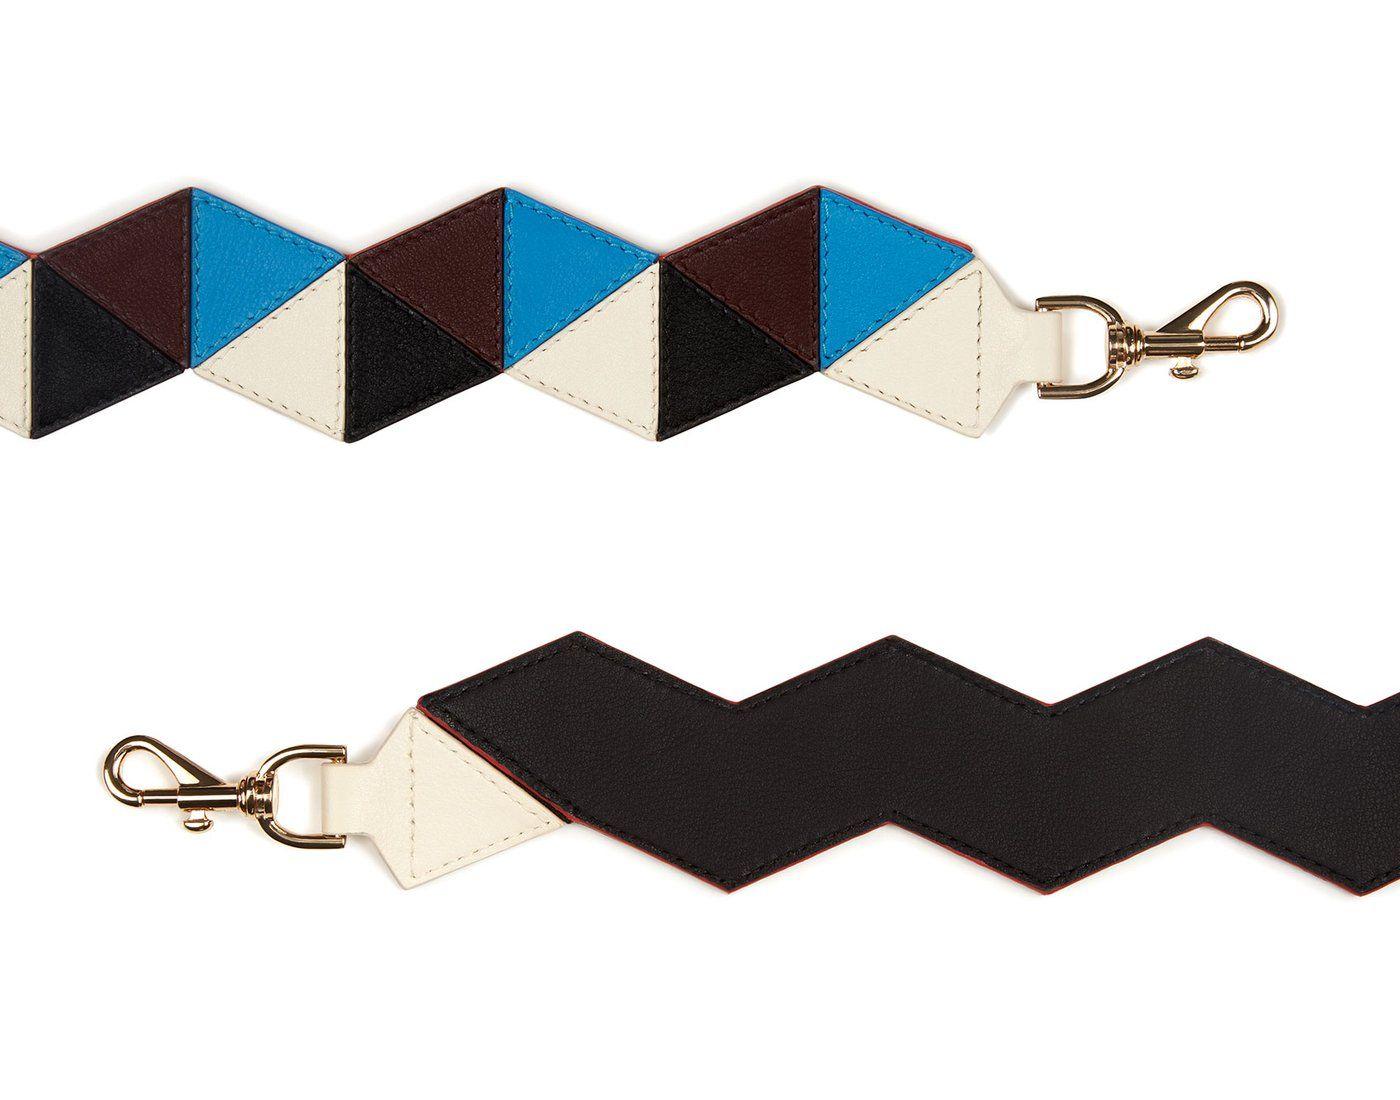 Blue and Black with Triangle Logo - Triangle Strap - Burgundy/Electric Blue/Vanilla/Black Leather Bag Strap